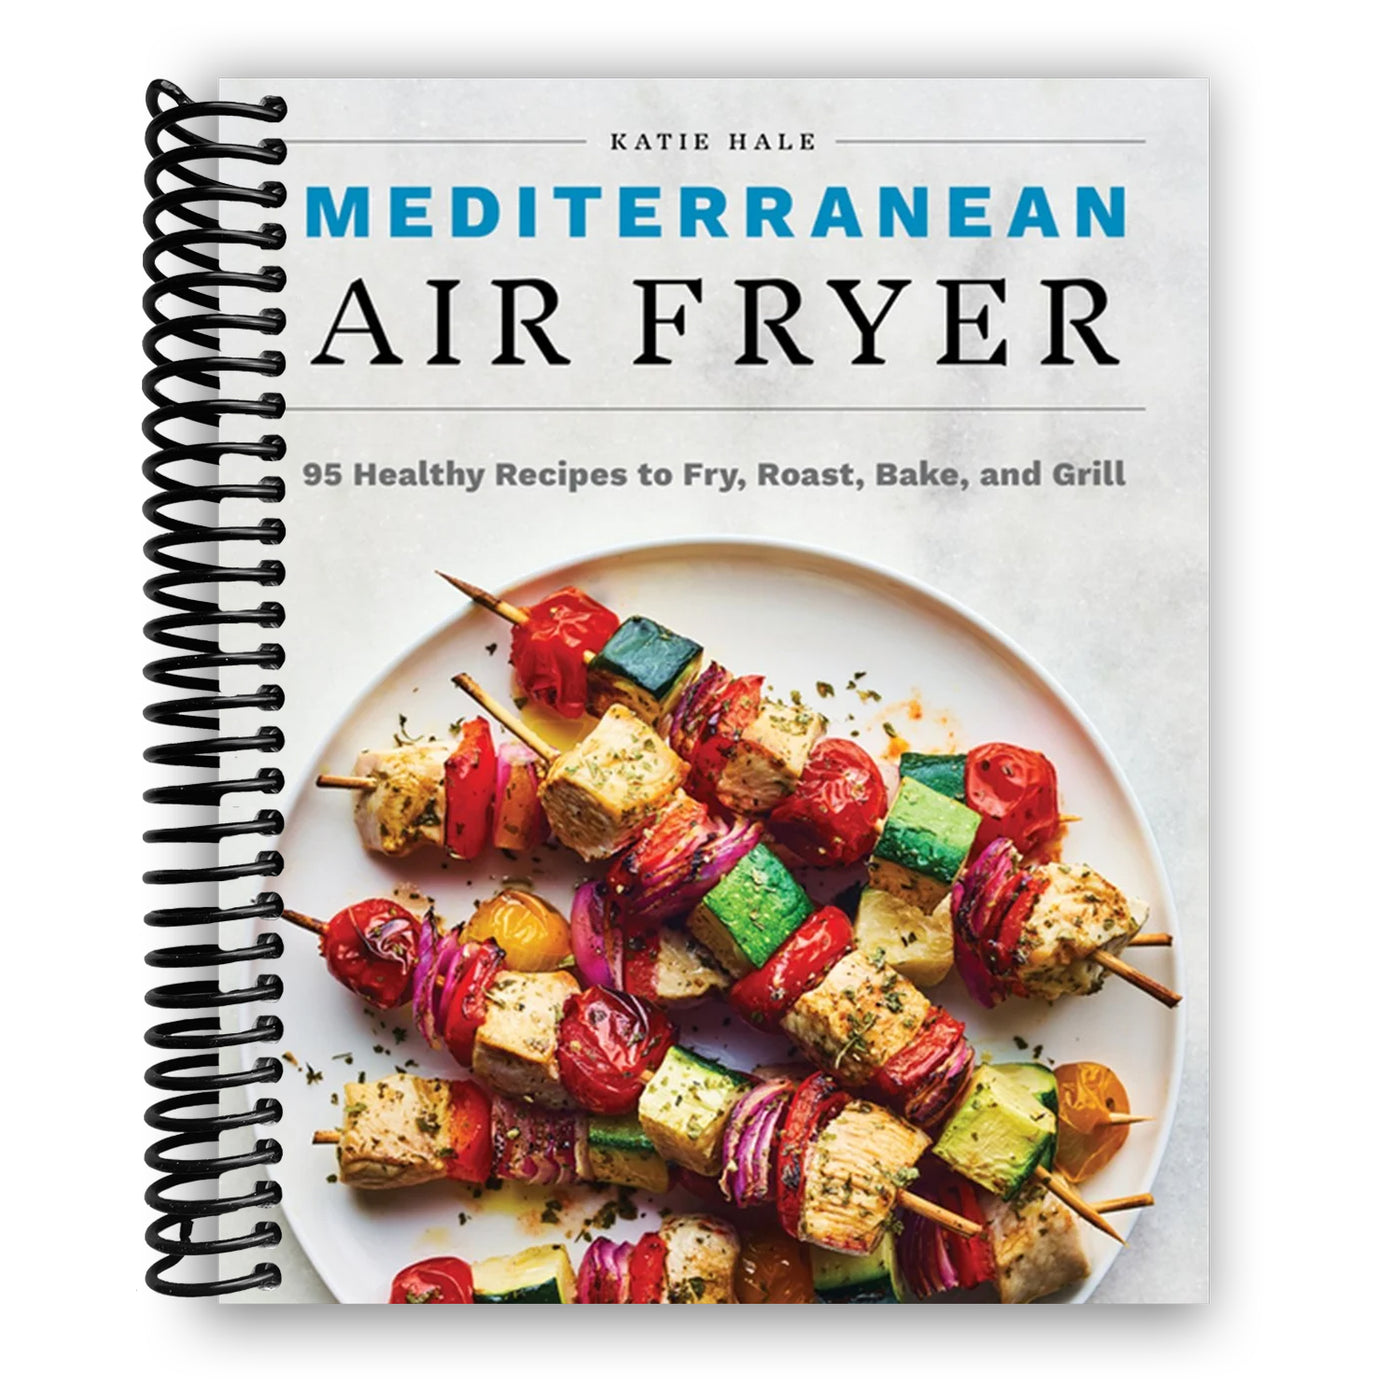 Mediterranean Air Fryer: 95 Healthy Recipes to Fry, Roast, Bake, and Grill (Spiral Bound)